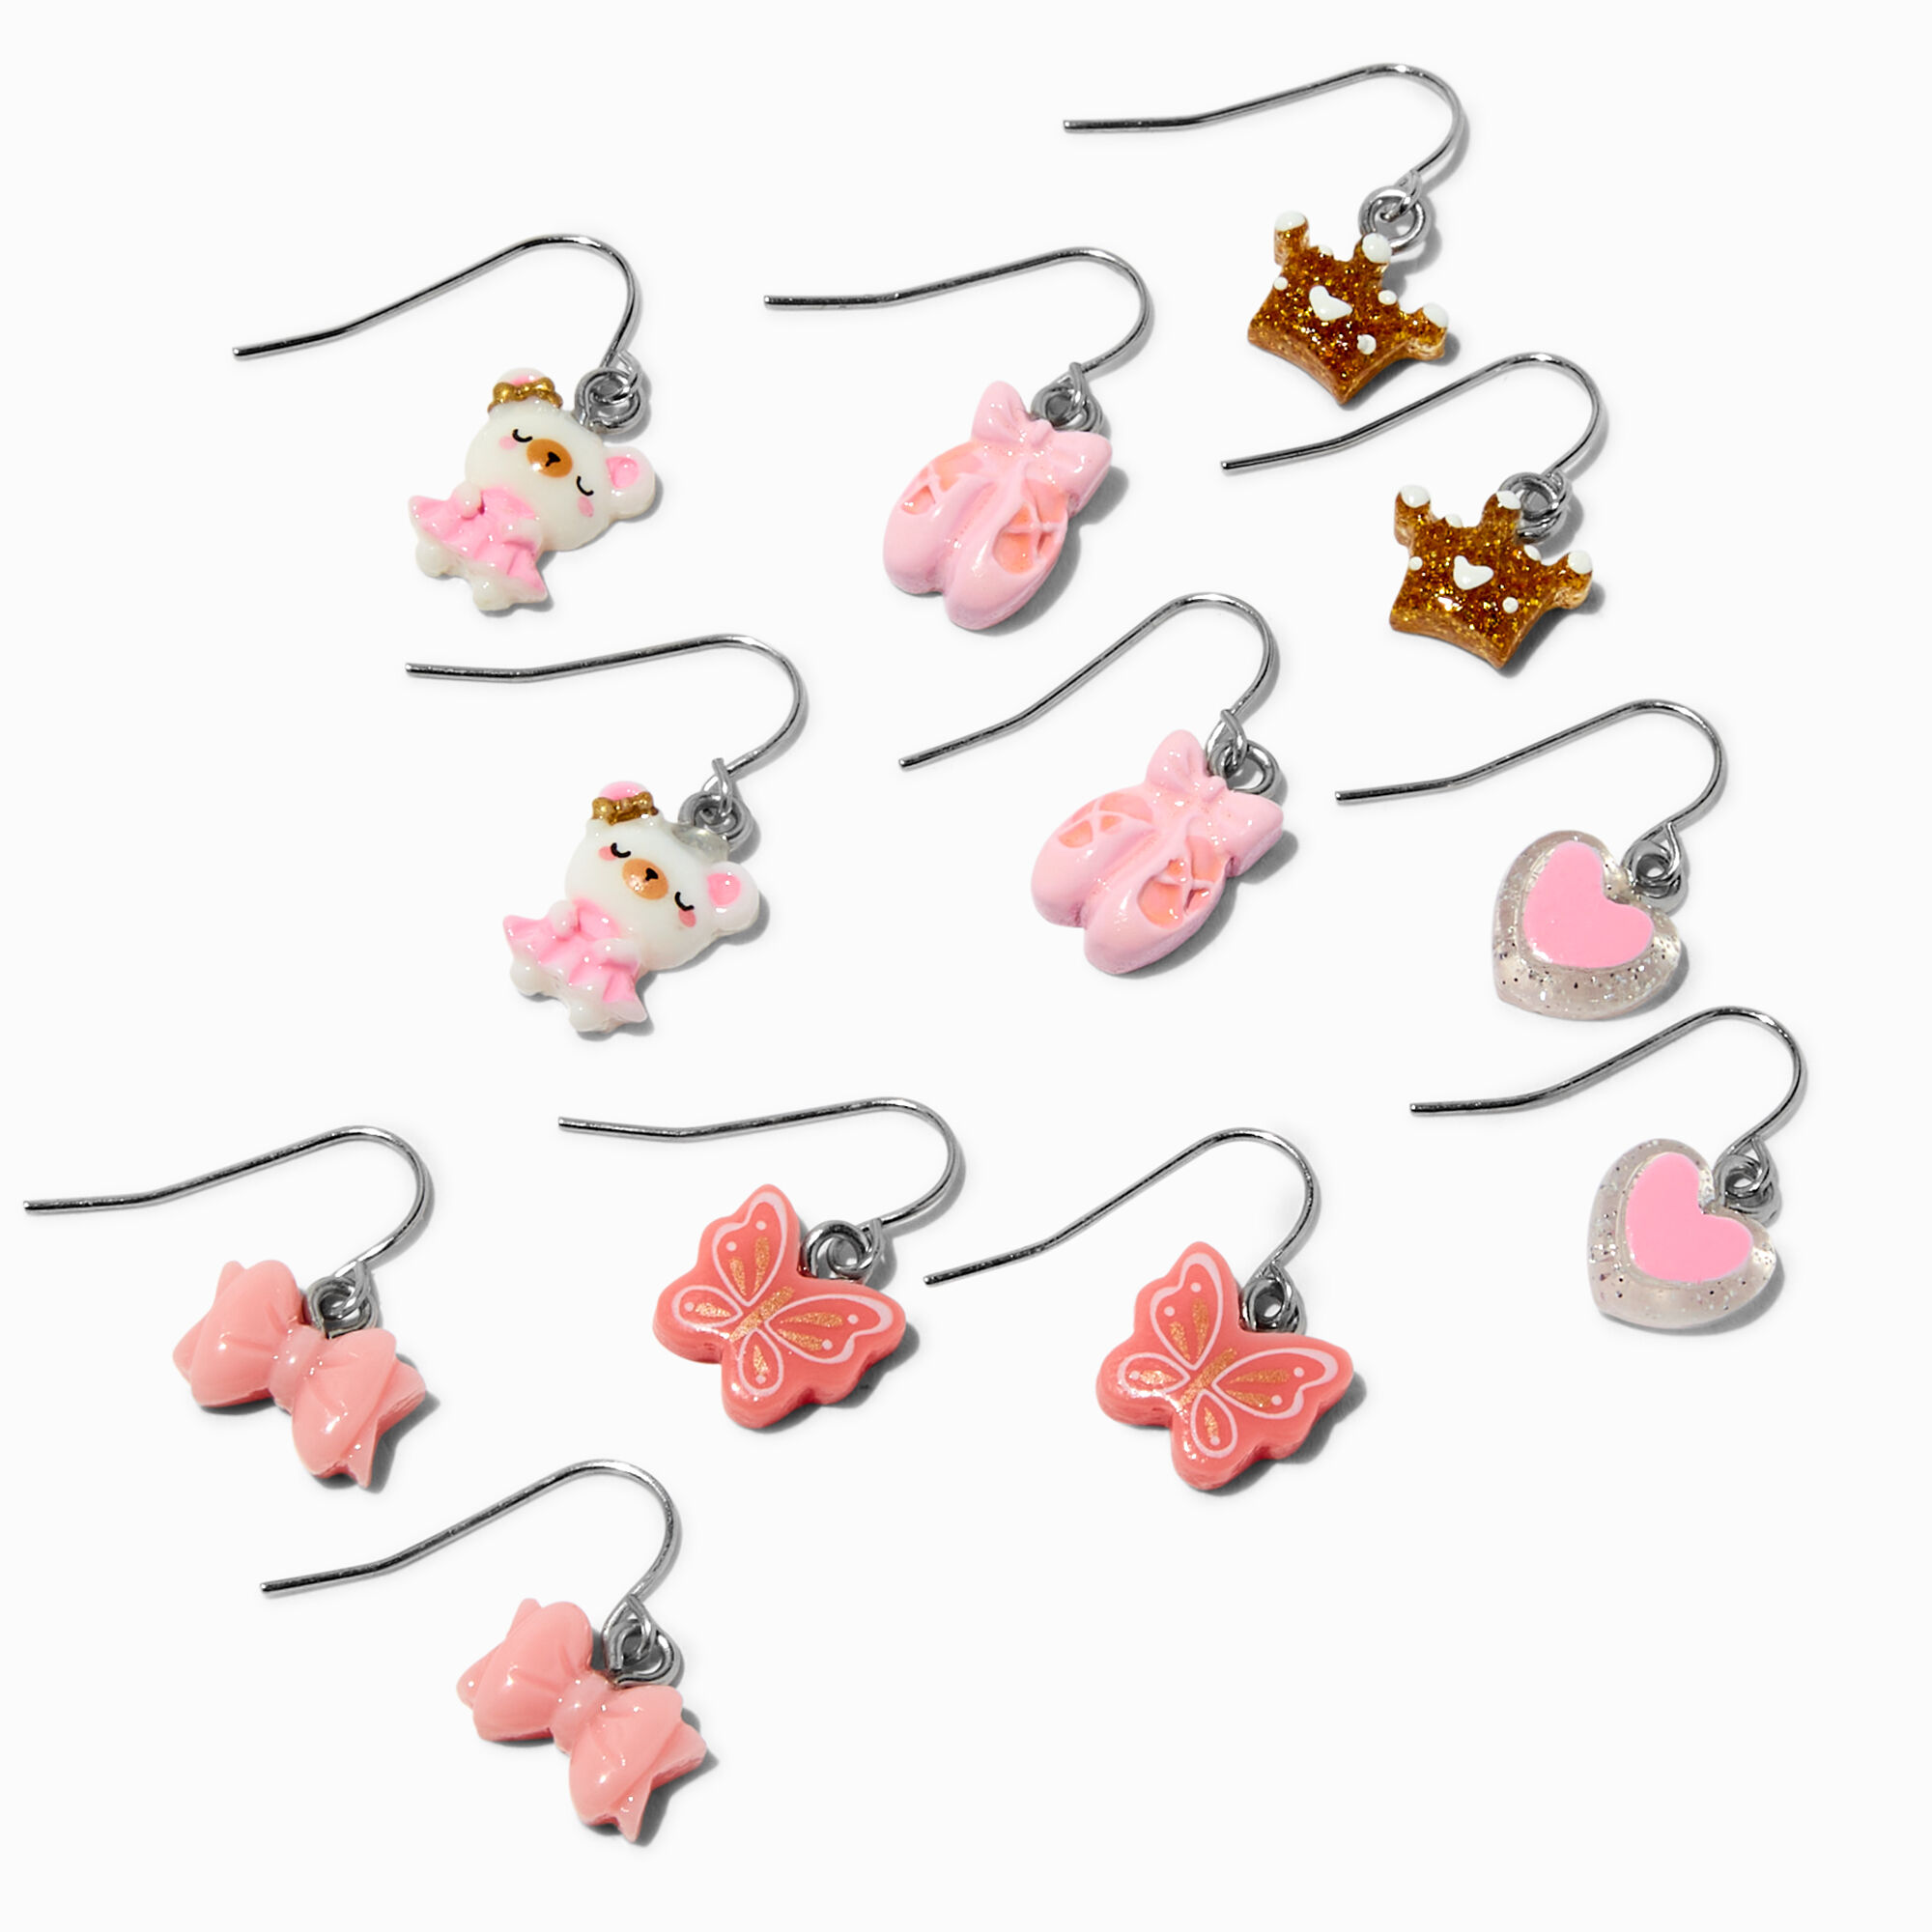 View Claires Ballet Butterflies Bows Drop Earrings 6 Pack Pink information